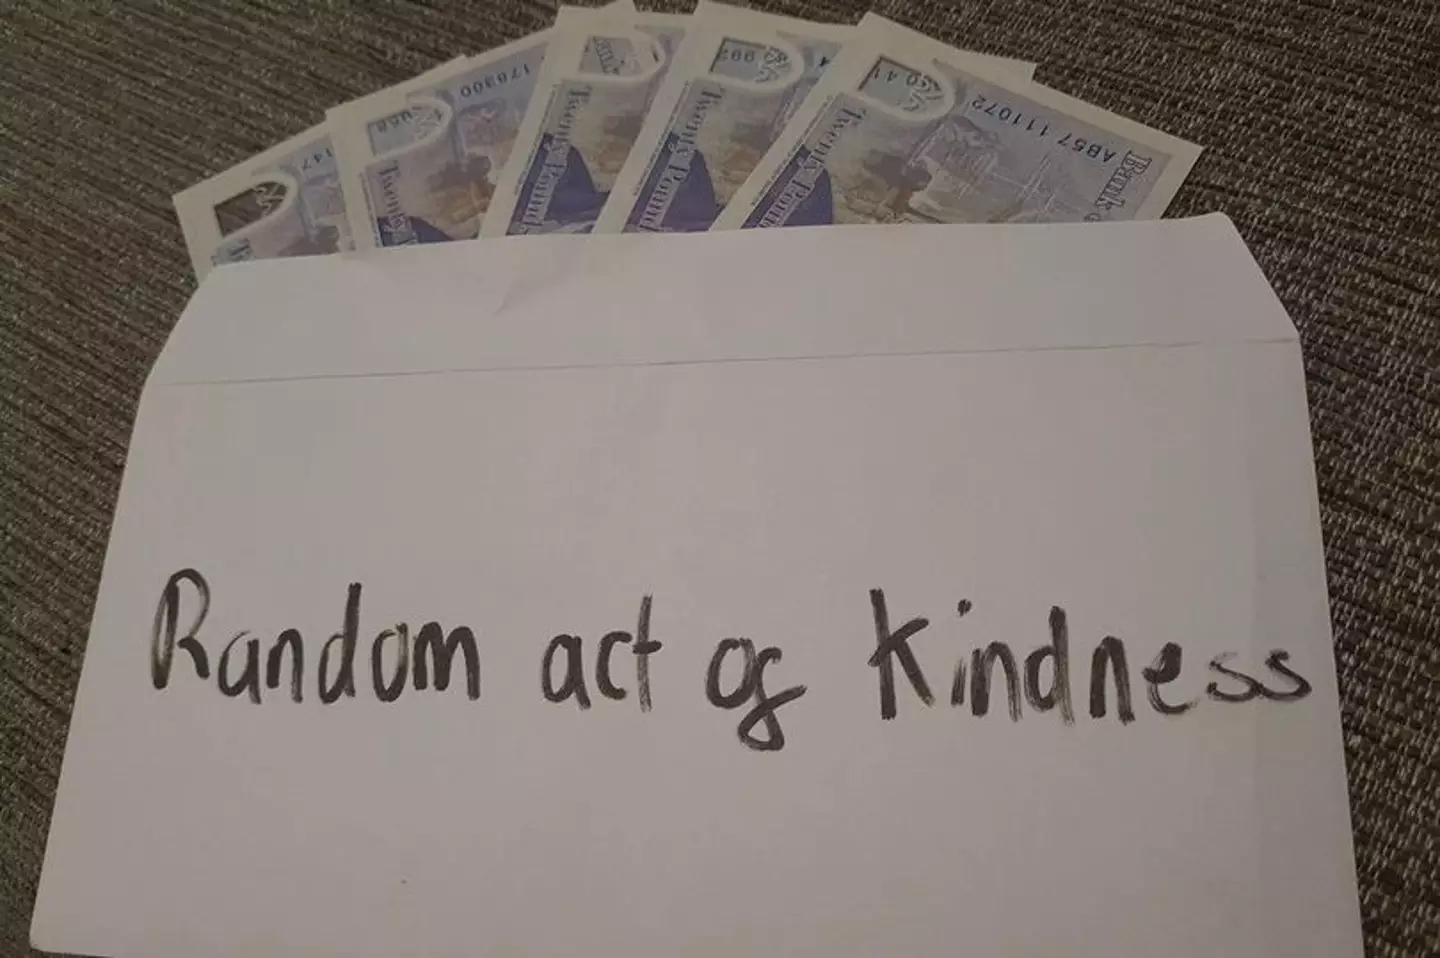 Some mystery merry-maker is going around posting envelopes filled with £100 in a 'random act of kindness'.